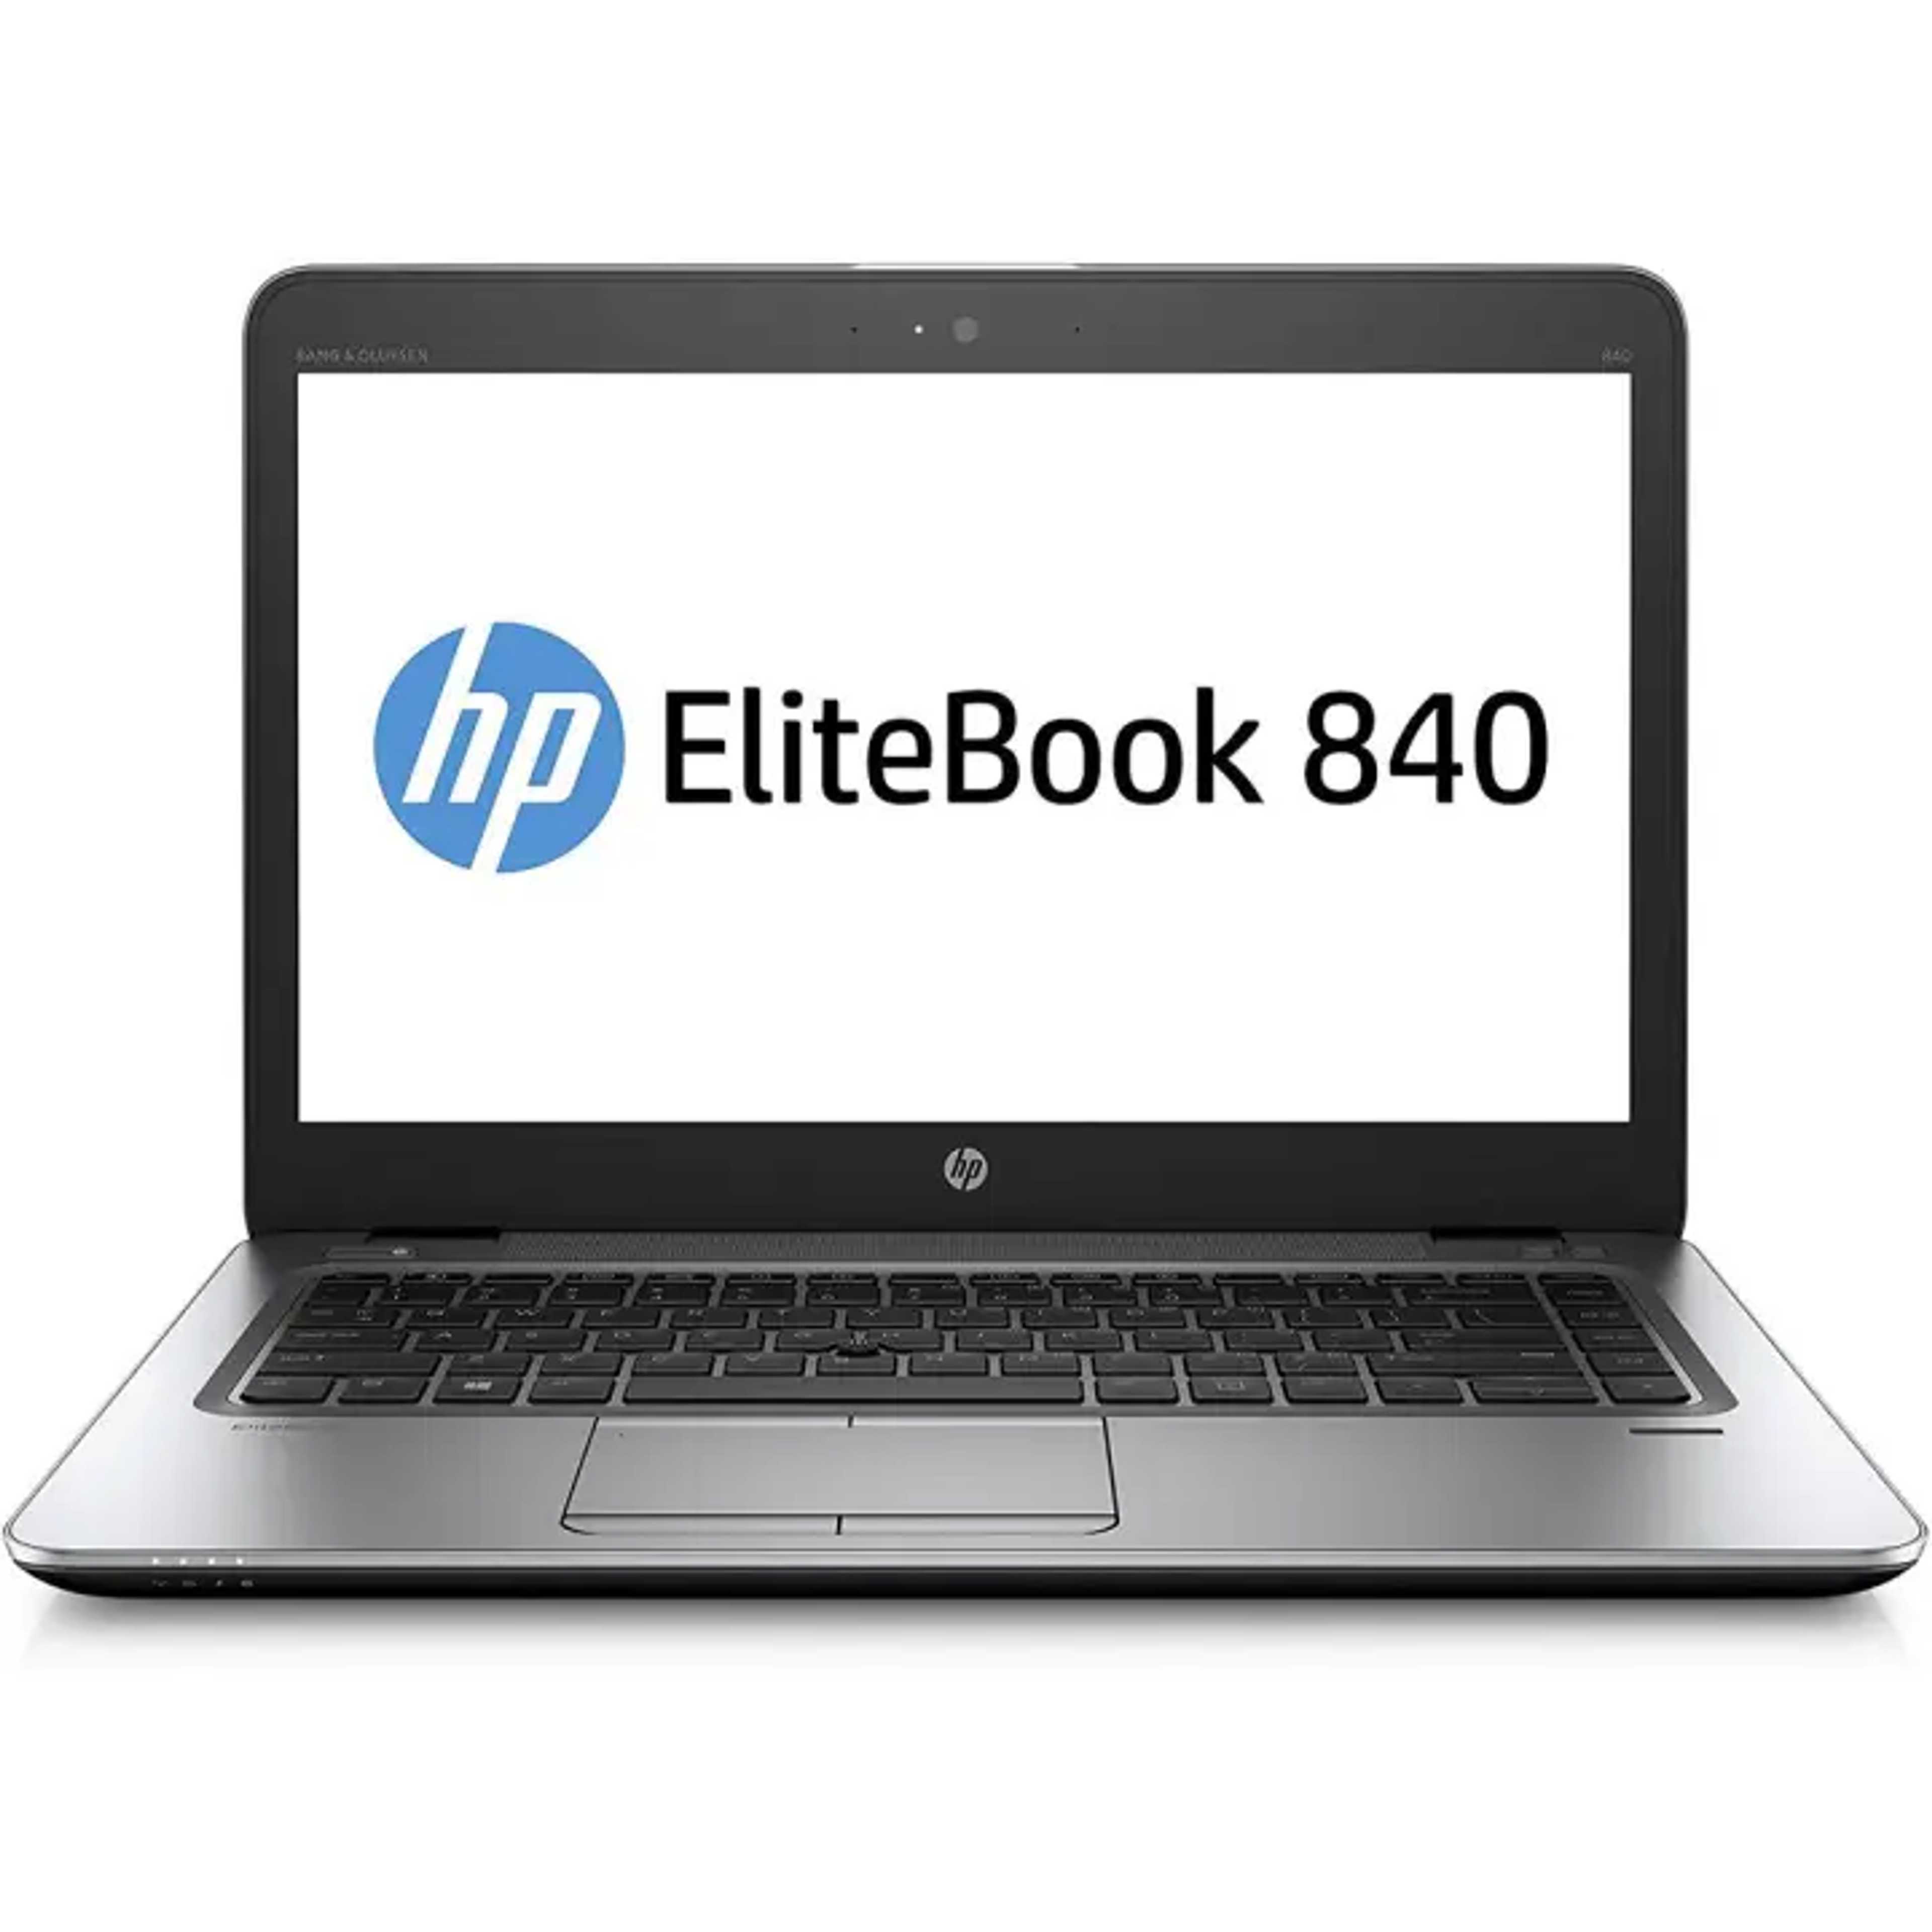 HP EliteBook 840 G3 14.5-inch Laptop (Core i5 6th Gen/8GB RAM(Upgradable to 32)/256GB SSD/Windows 10 Pro/MS Office 2019/More than 4 GB Intel HD Integrated Graphics, Backlit Keyboard), Silver With free Laptop Bag